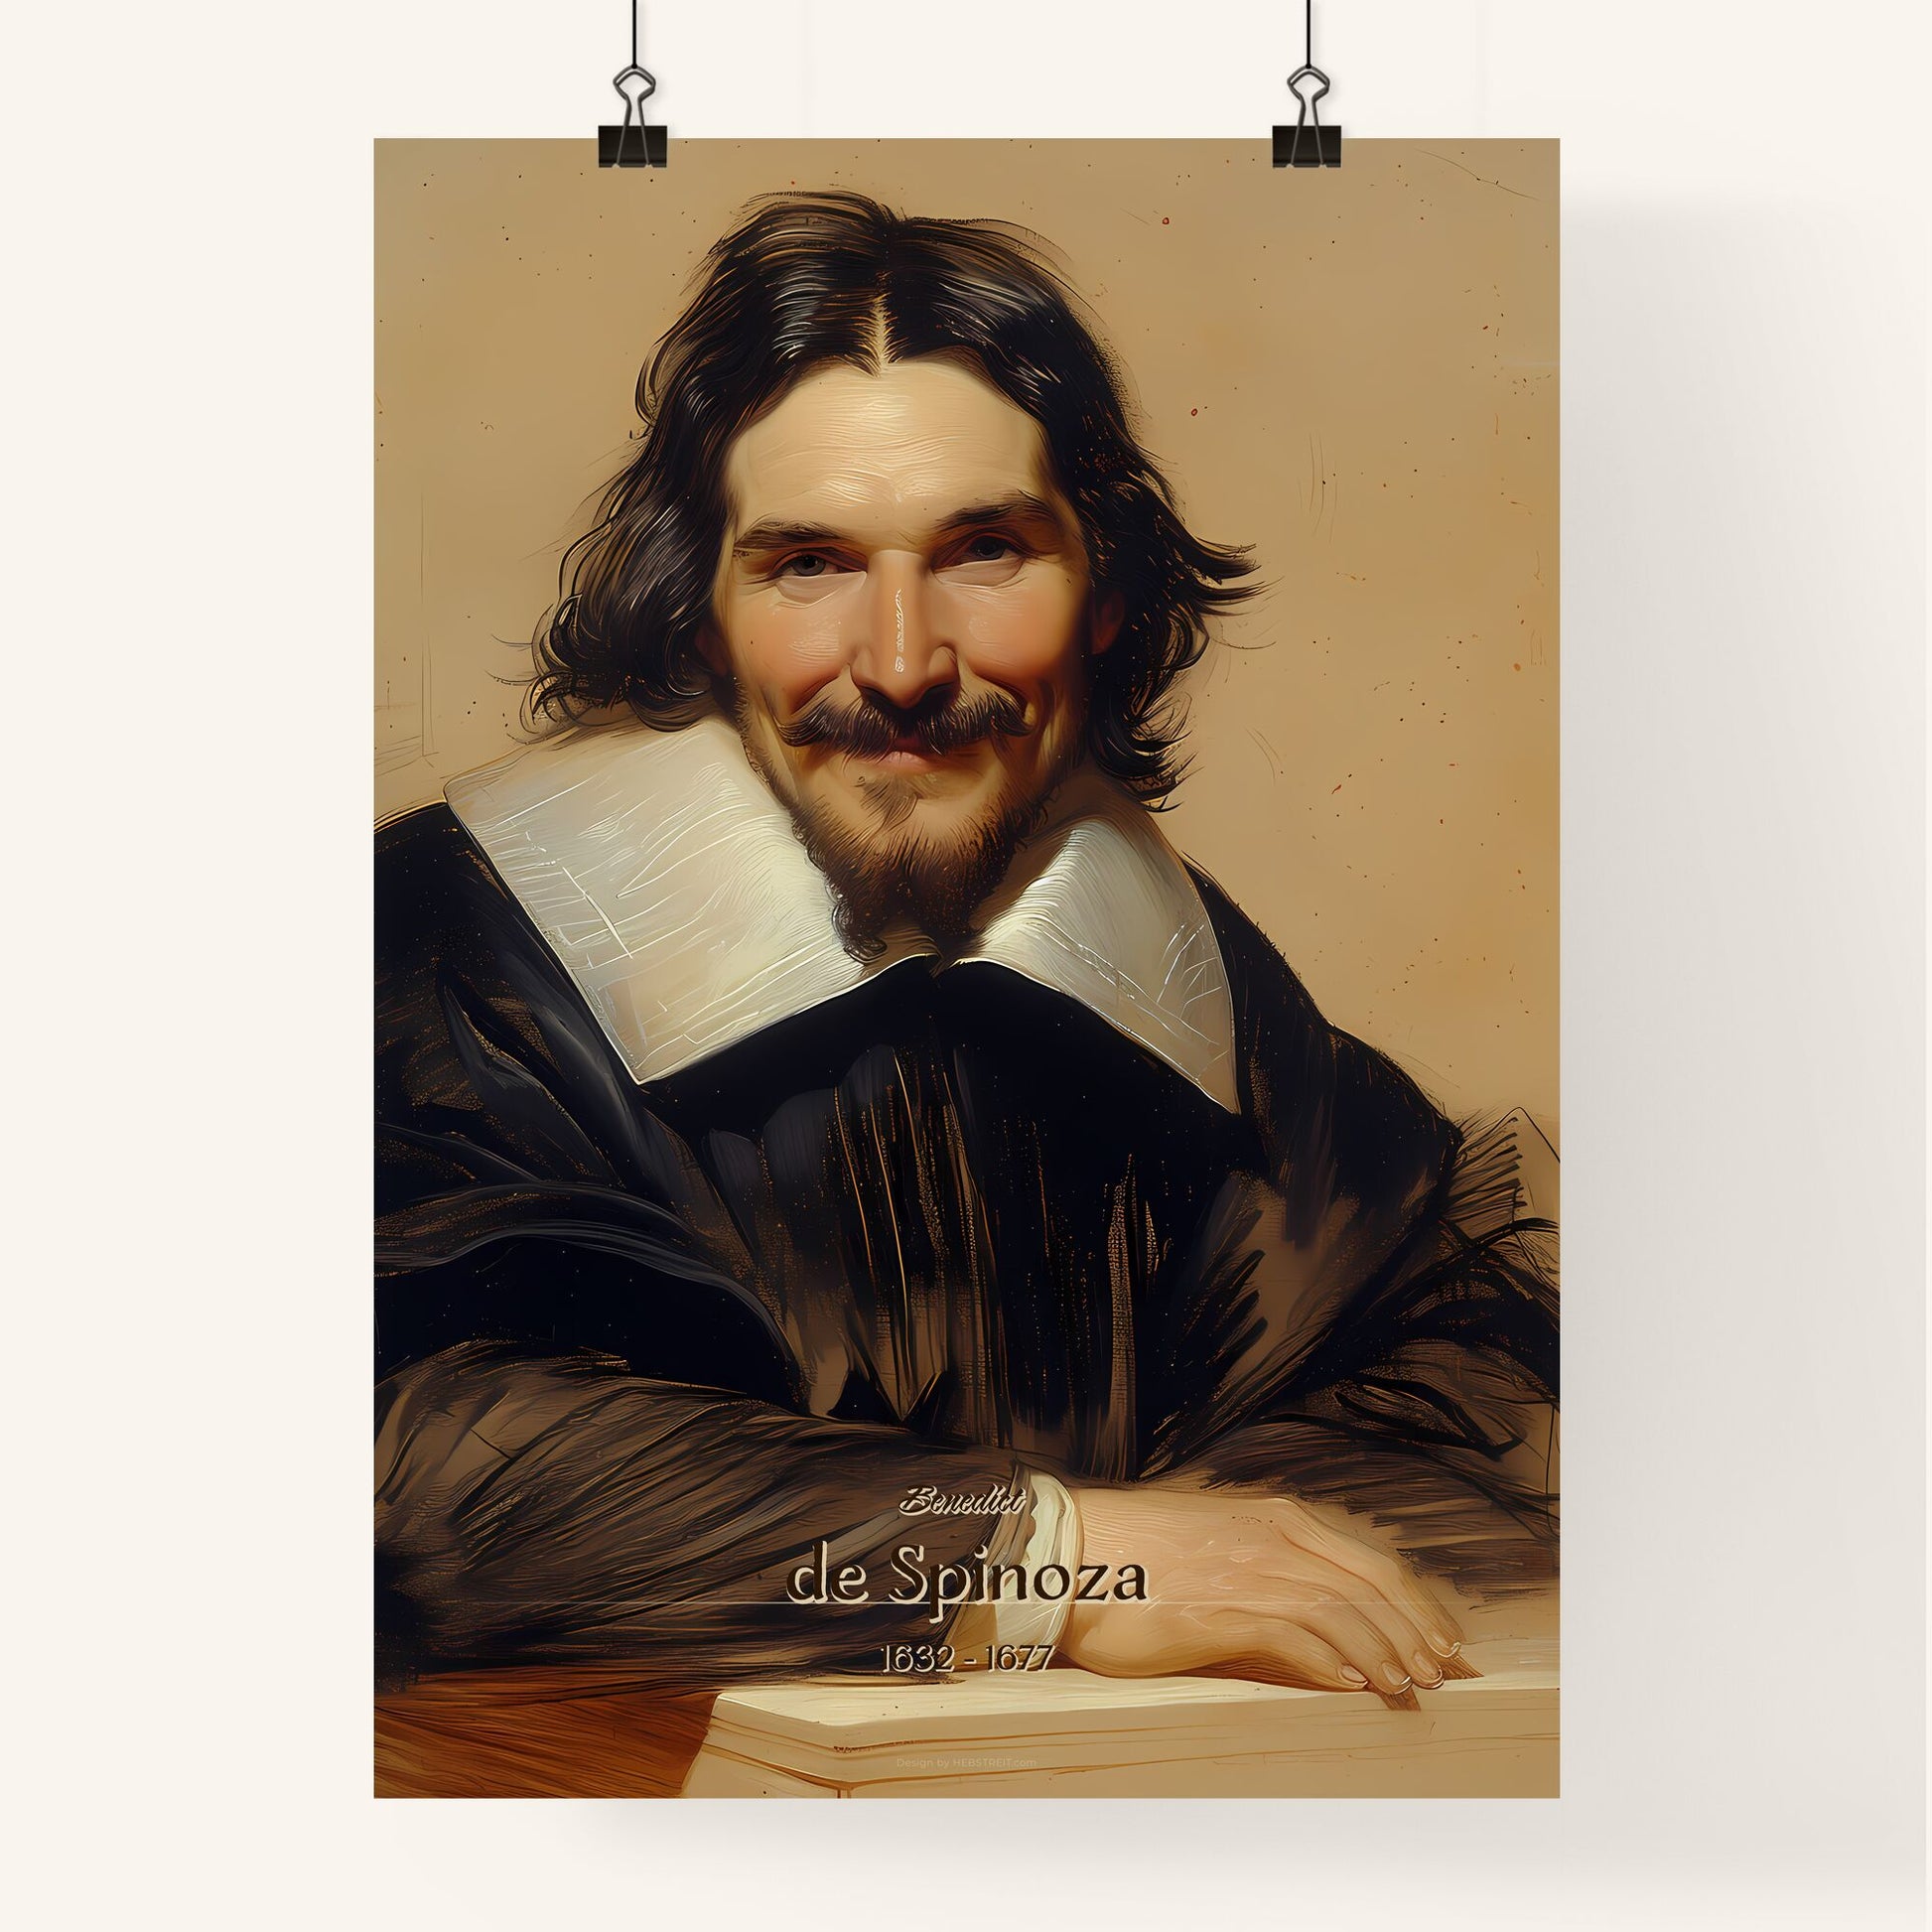 Benedict, de Spinoza, 1632 - 1677, A Poster of a man with a beard and mustache wearing a black robe Default Title